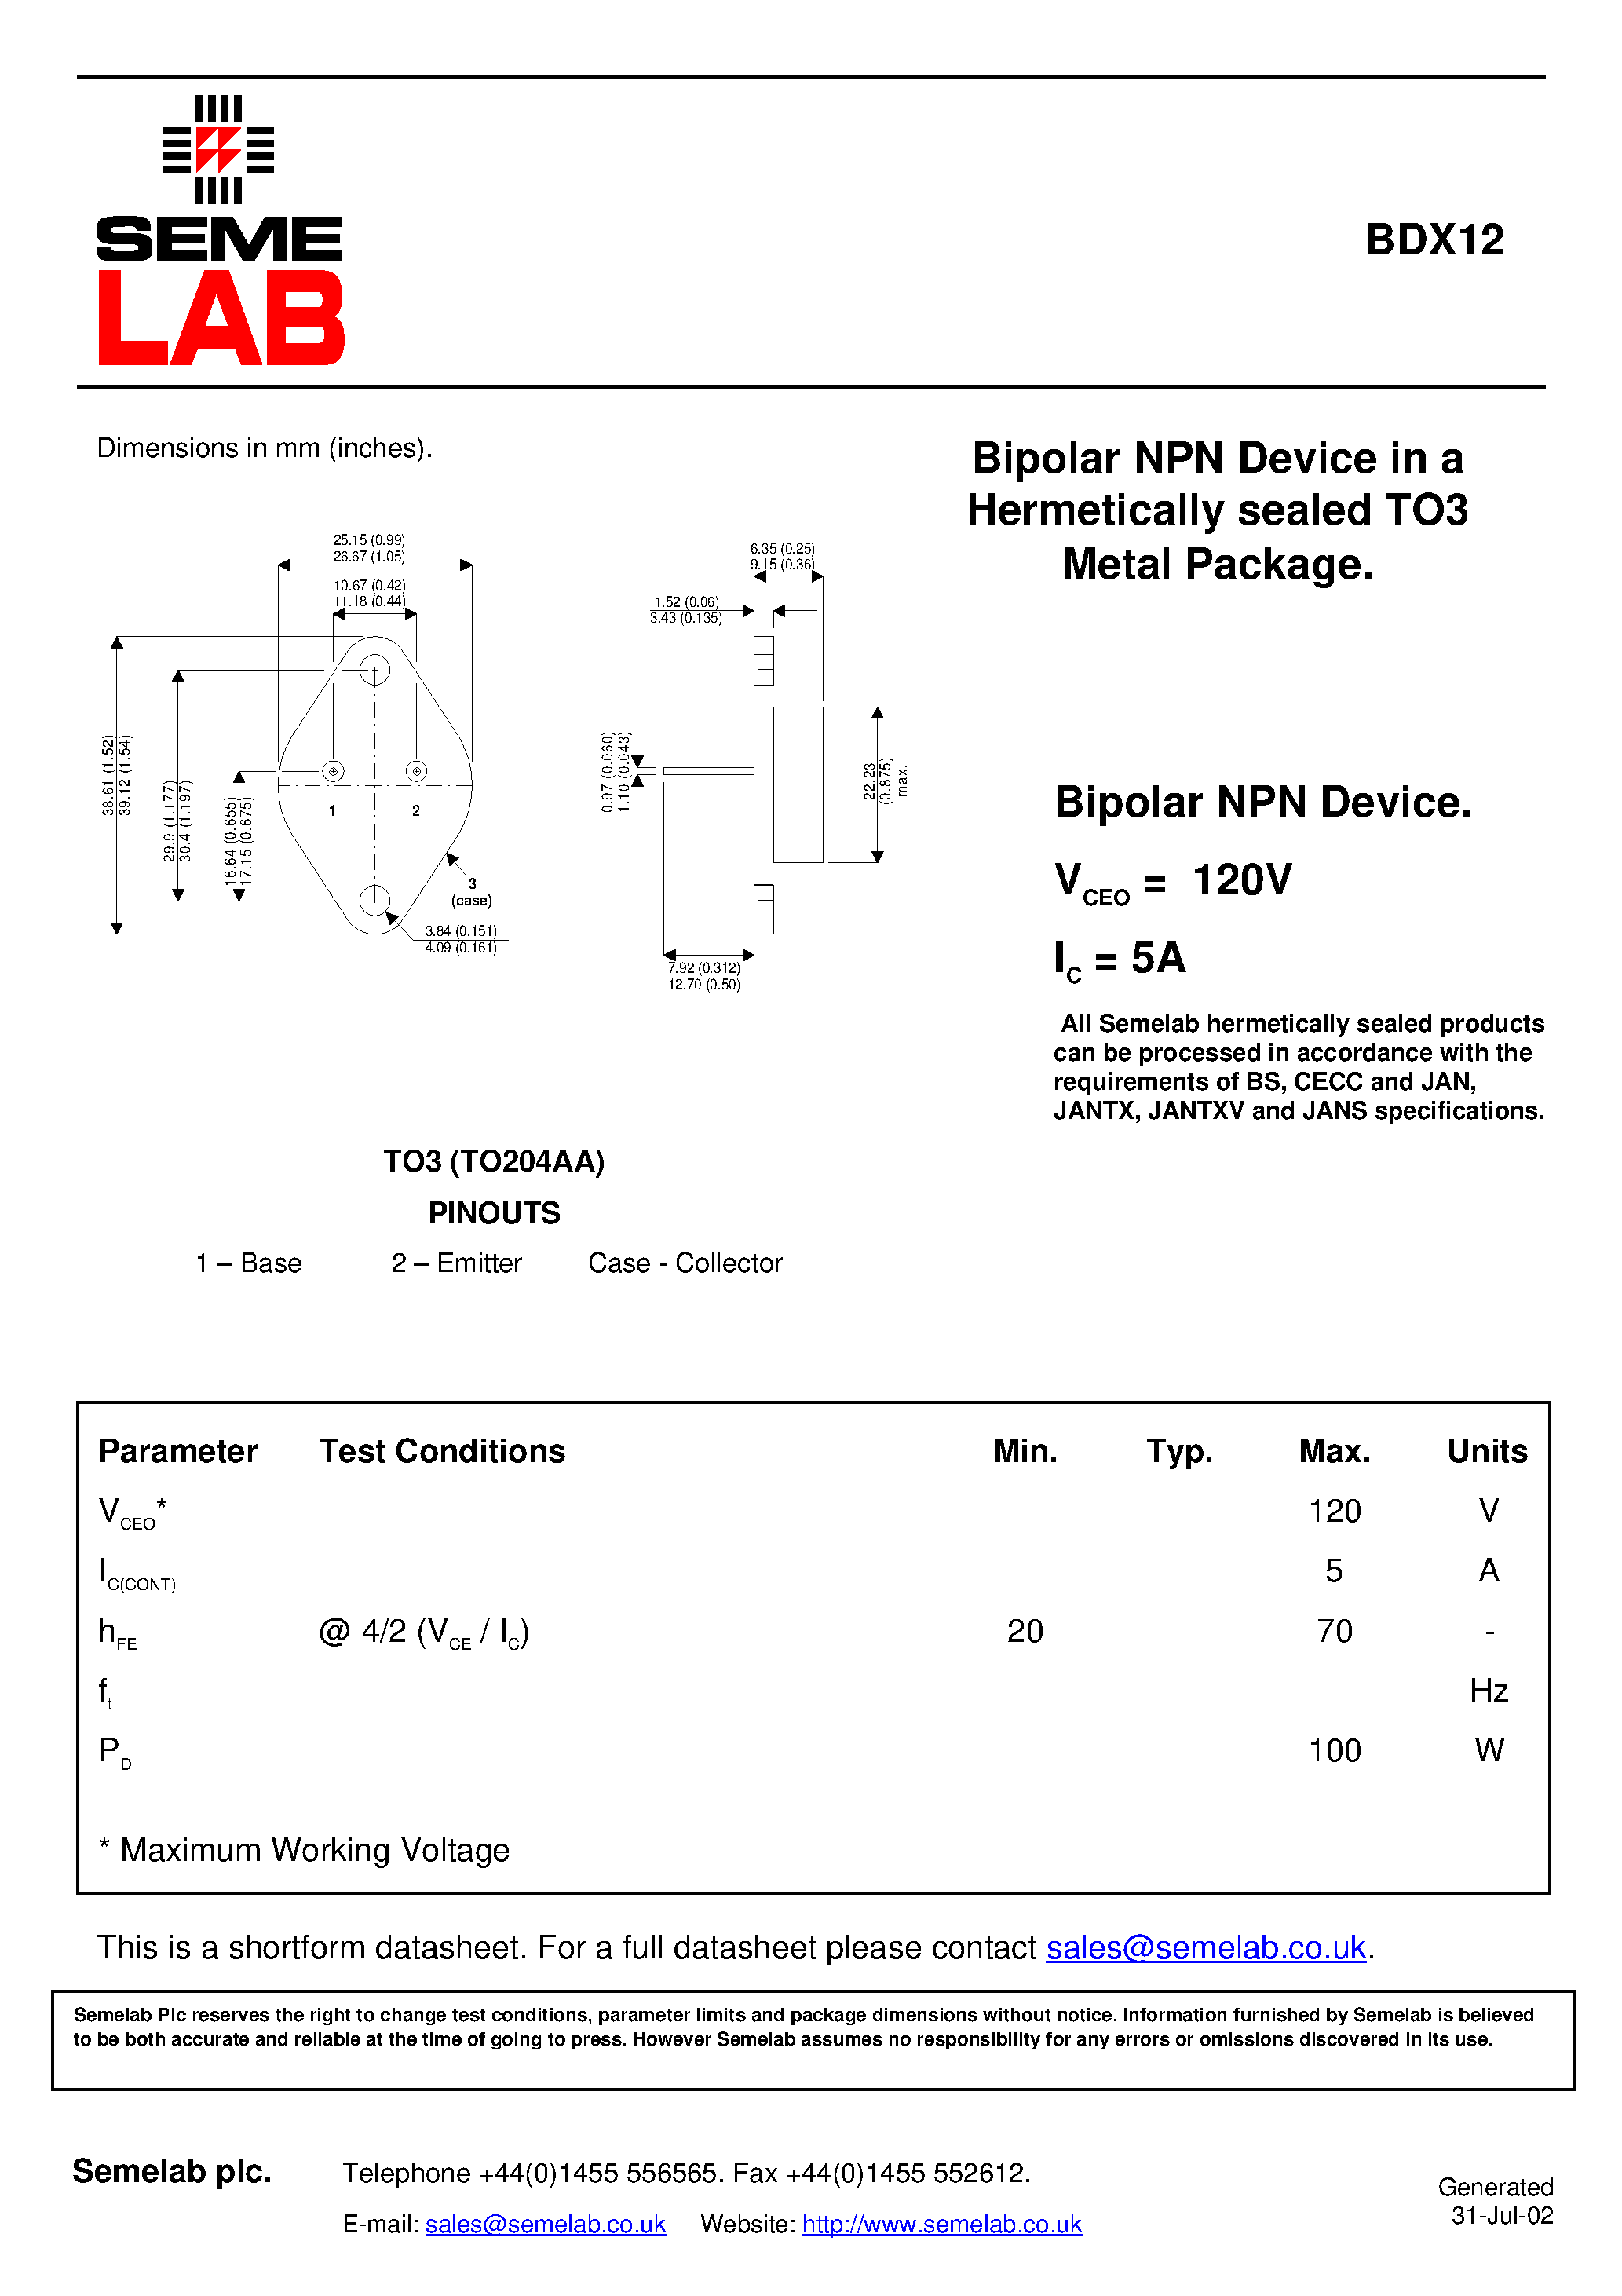 Datasheet BDX12 - Bipolar NPN Device in a Hermetically sealed TO3 Metal Package page 1